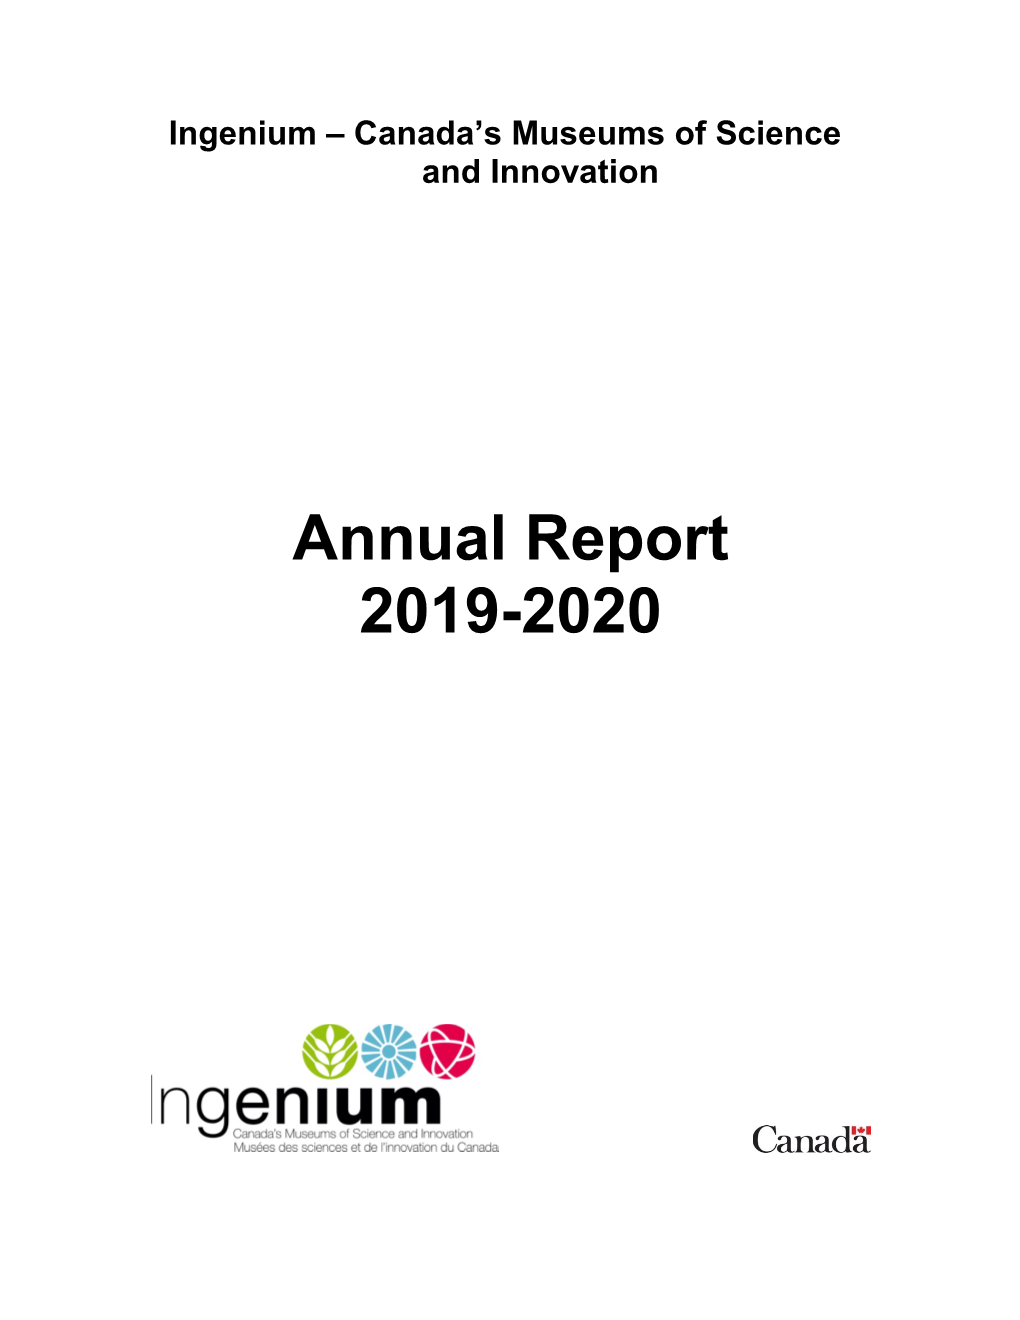 Annual Report 2019-2020 Table of Contents